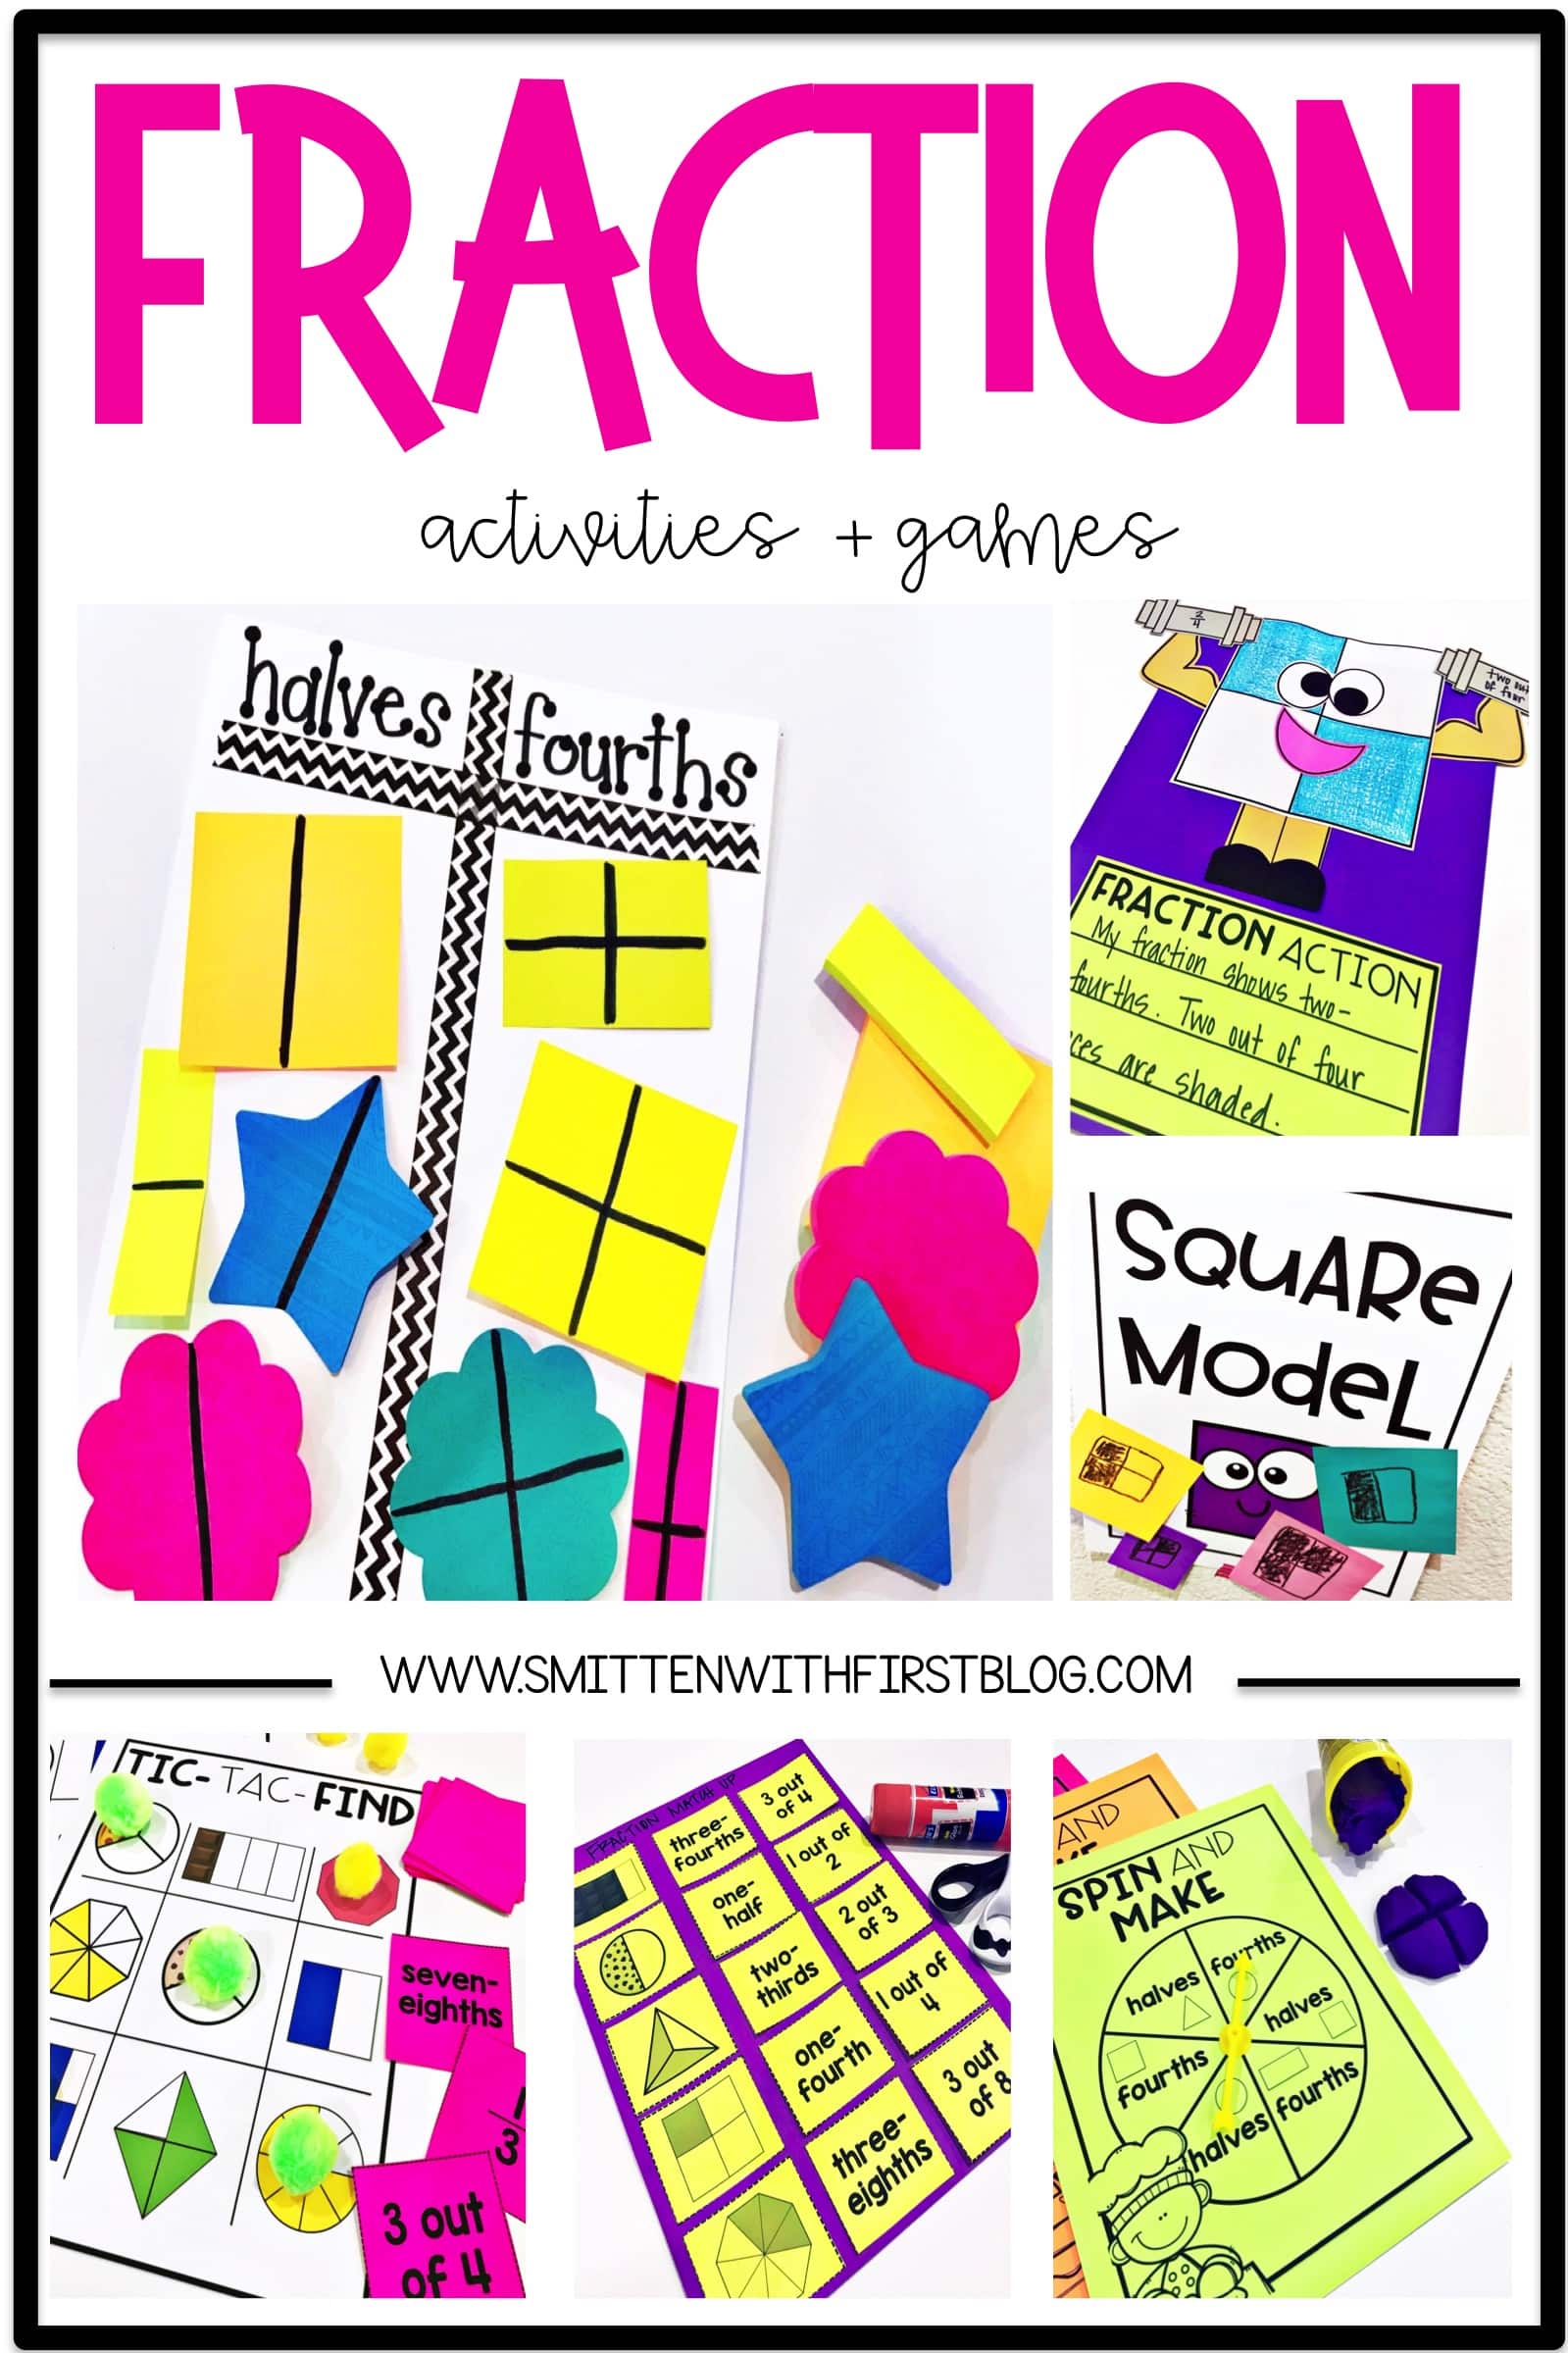 Fraction activities and games